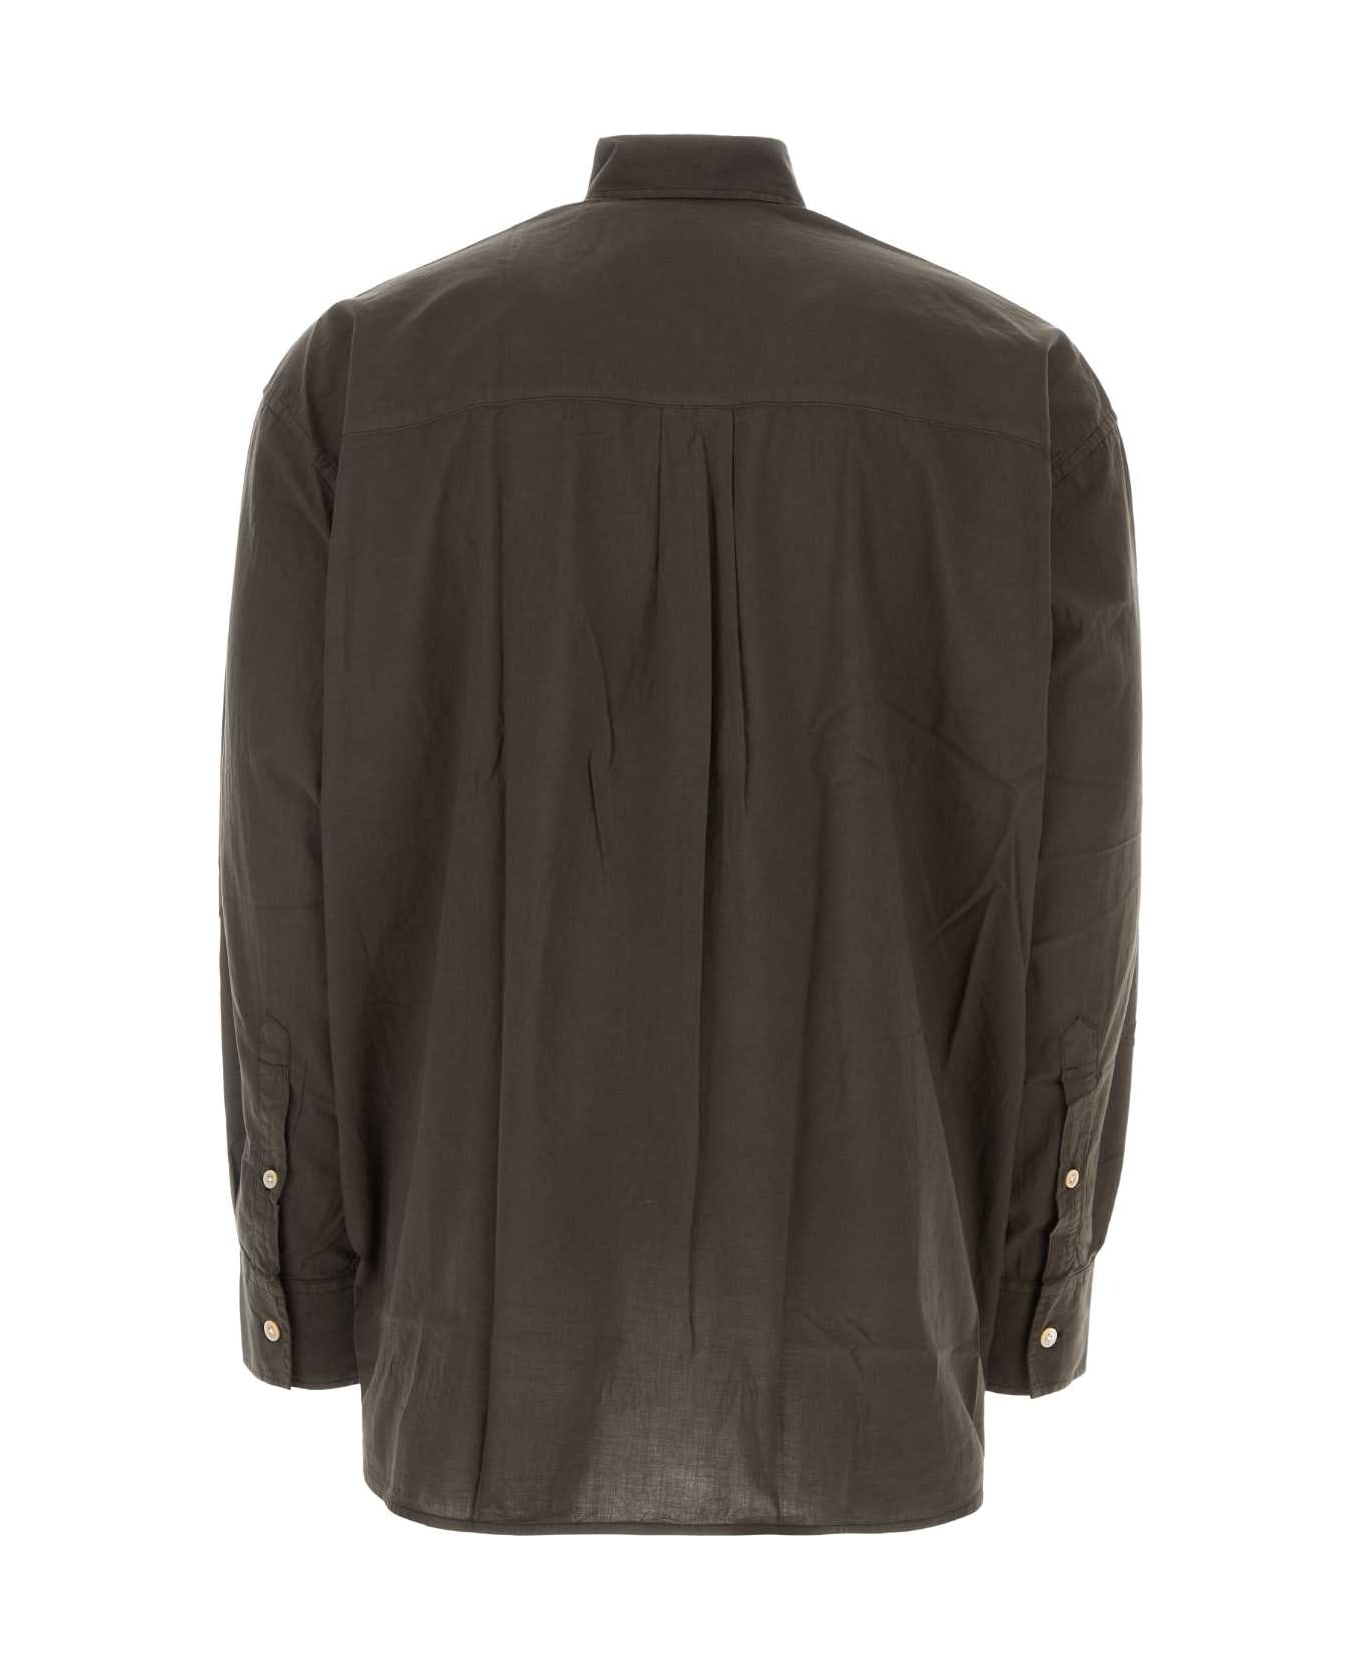 Our Legacy Brown Voile Borrowed Oversize Shirt - FADEDBROWNCOTTONVOILE